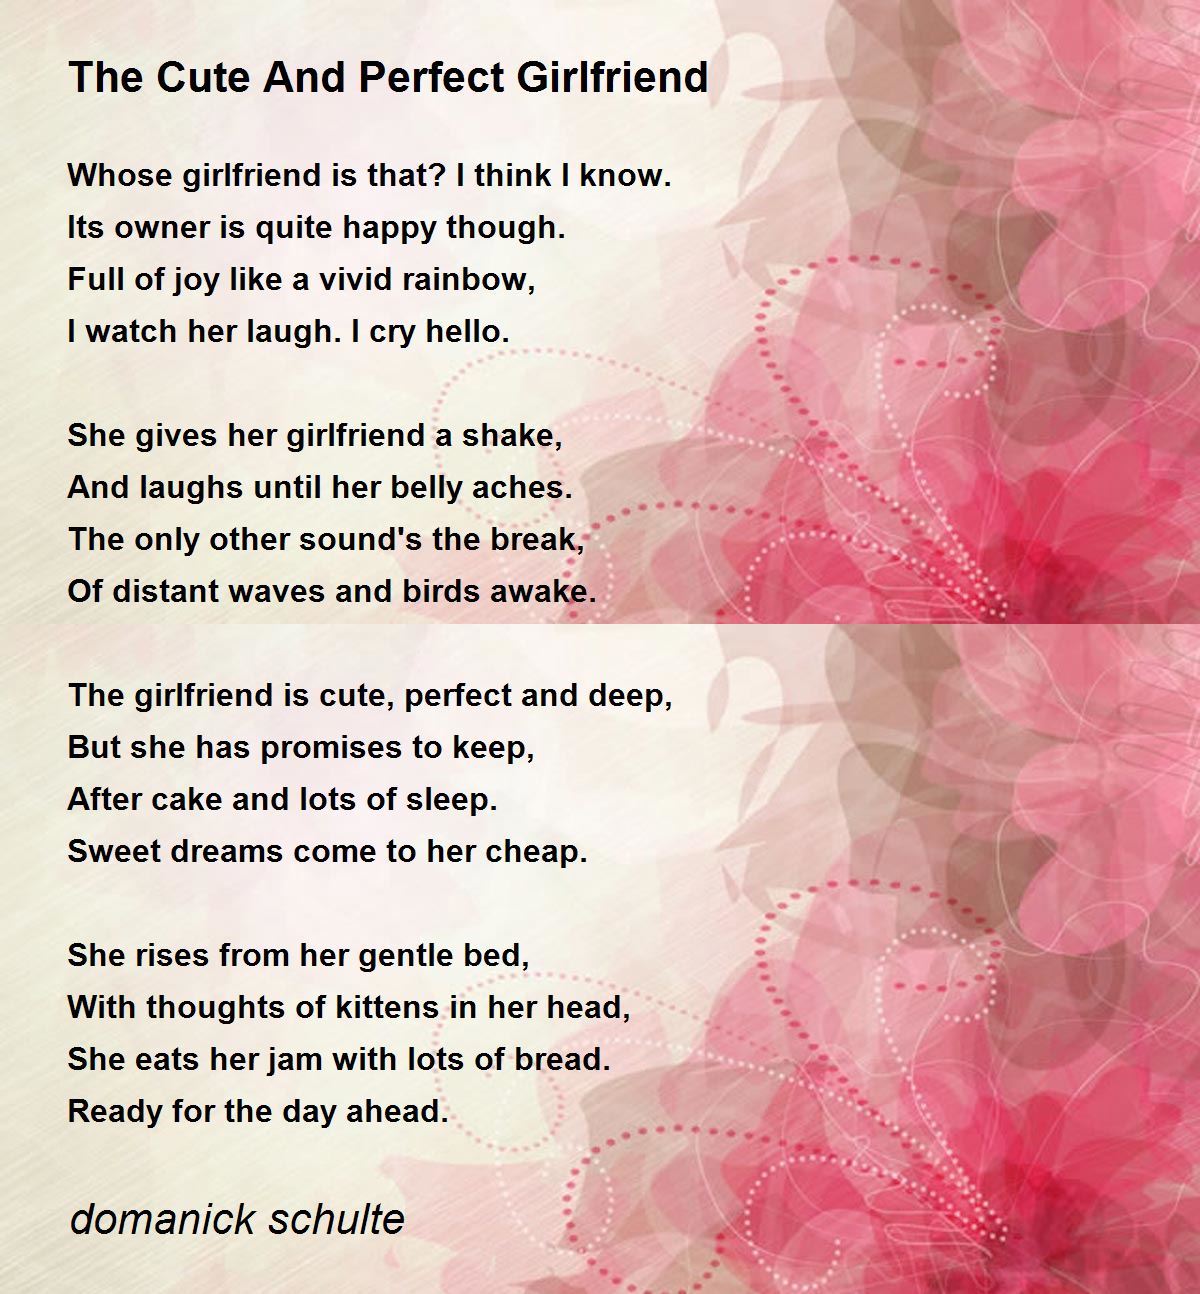 The Cute And Perfect Girlfriend - The Cute And Perfect Girlf